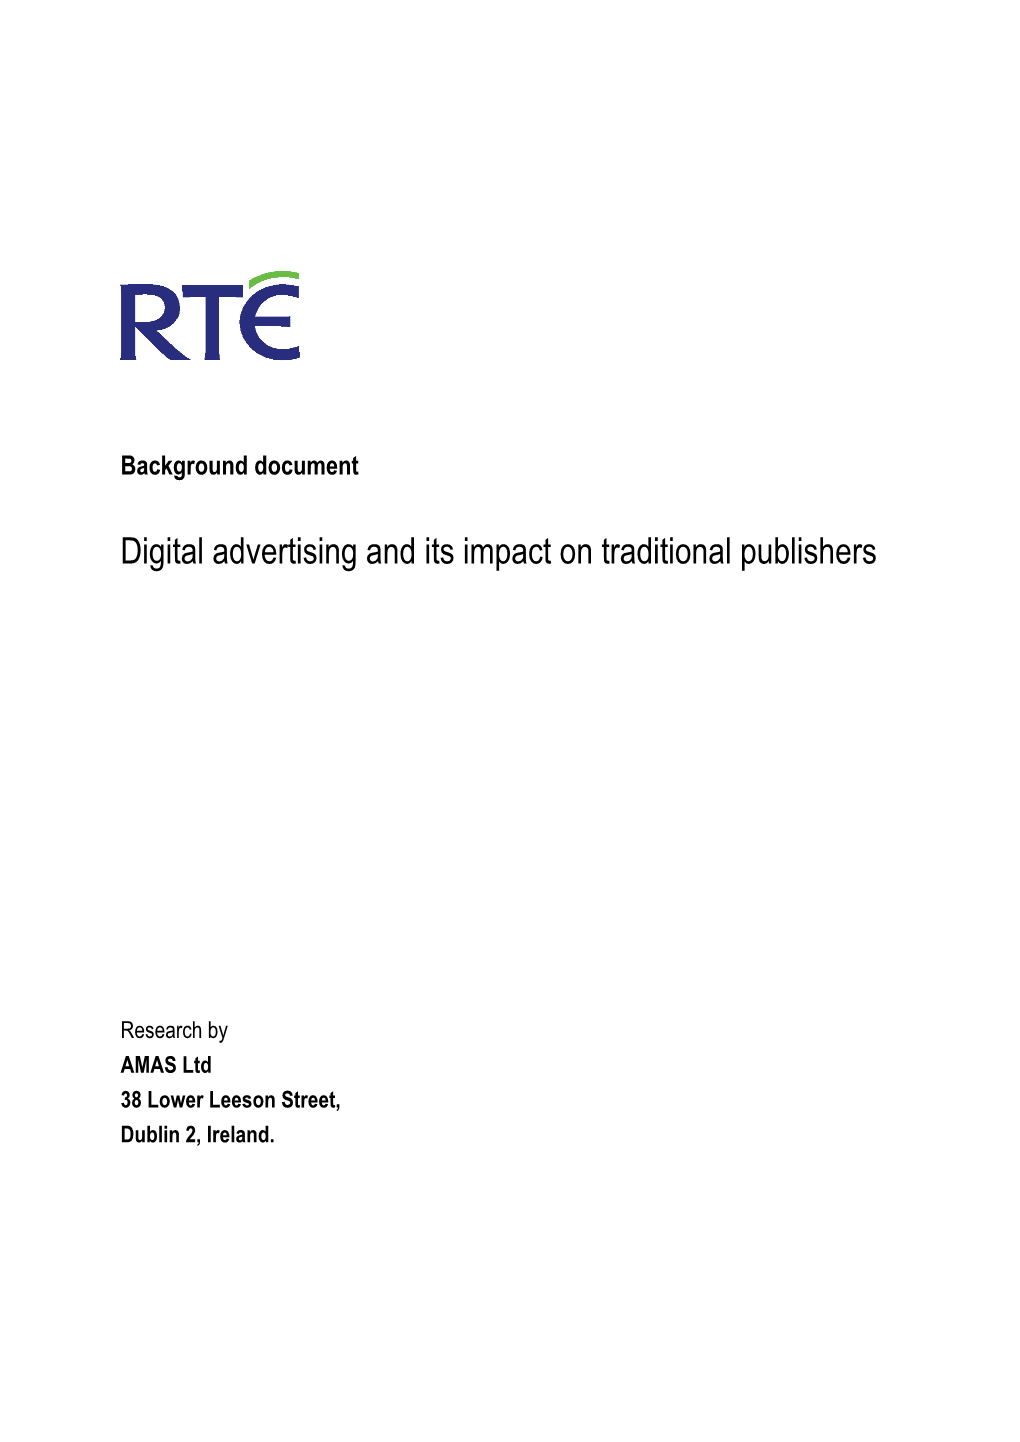 Digital Advertising and Its Impact on Traditional Publishers